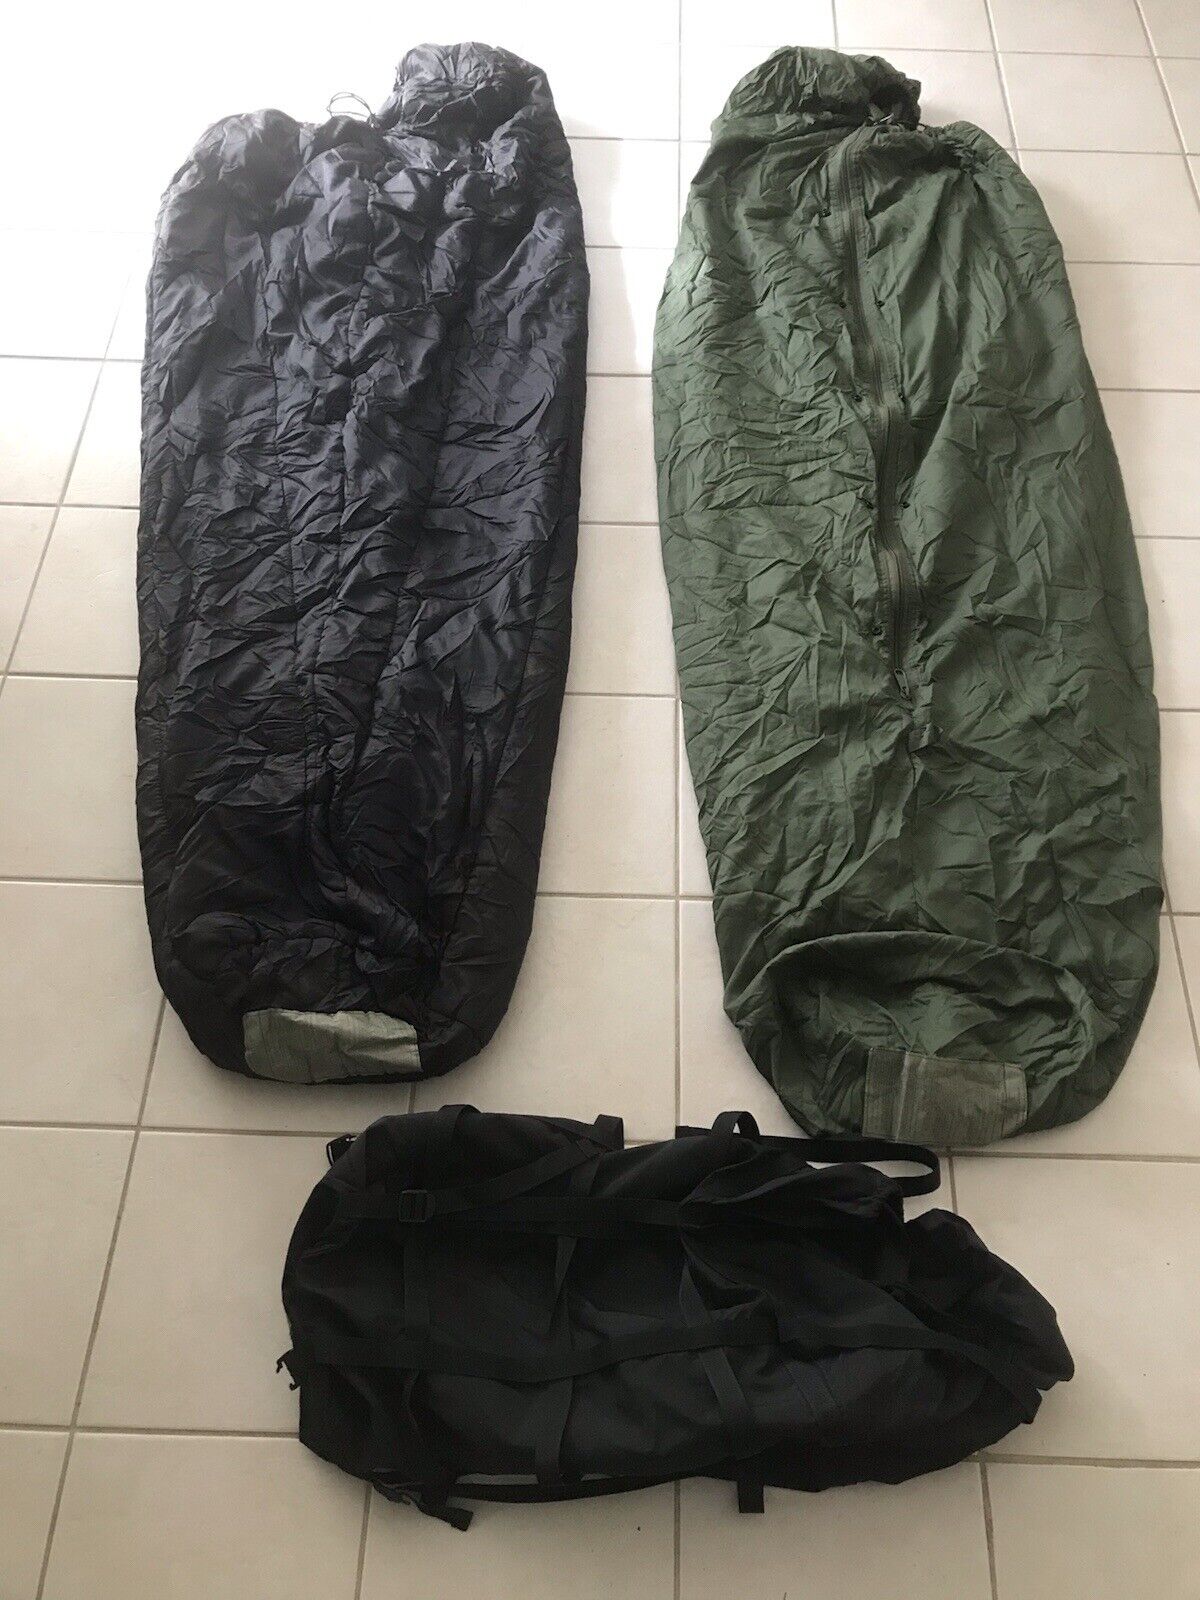 US Military 3 Piece Modular Sleeping Bag Sleep System. Excellent Condition